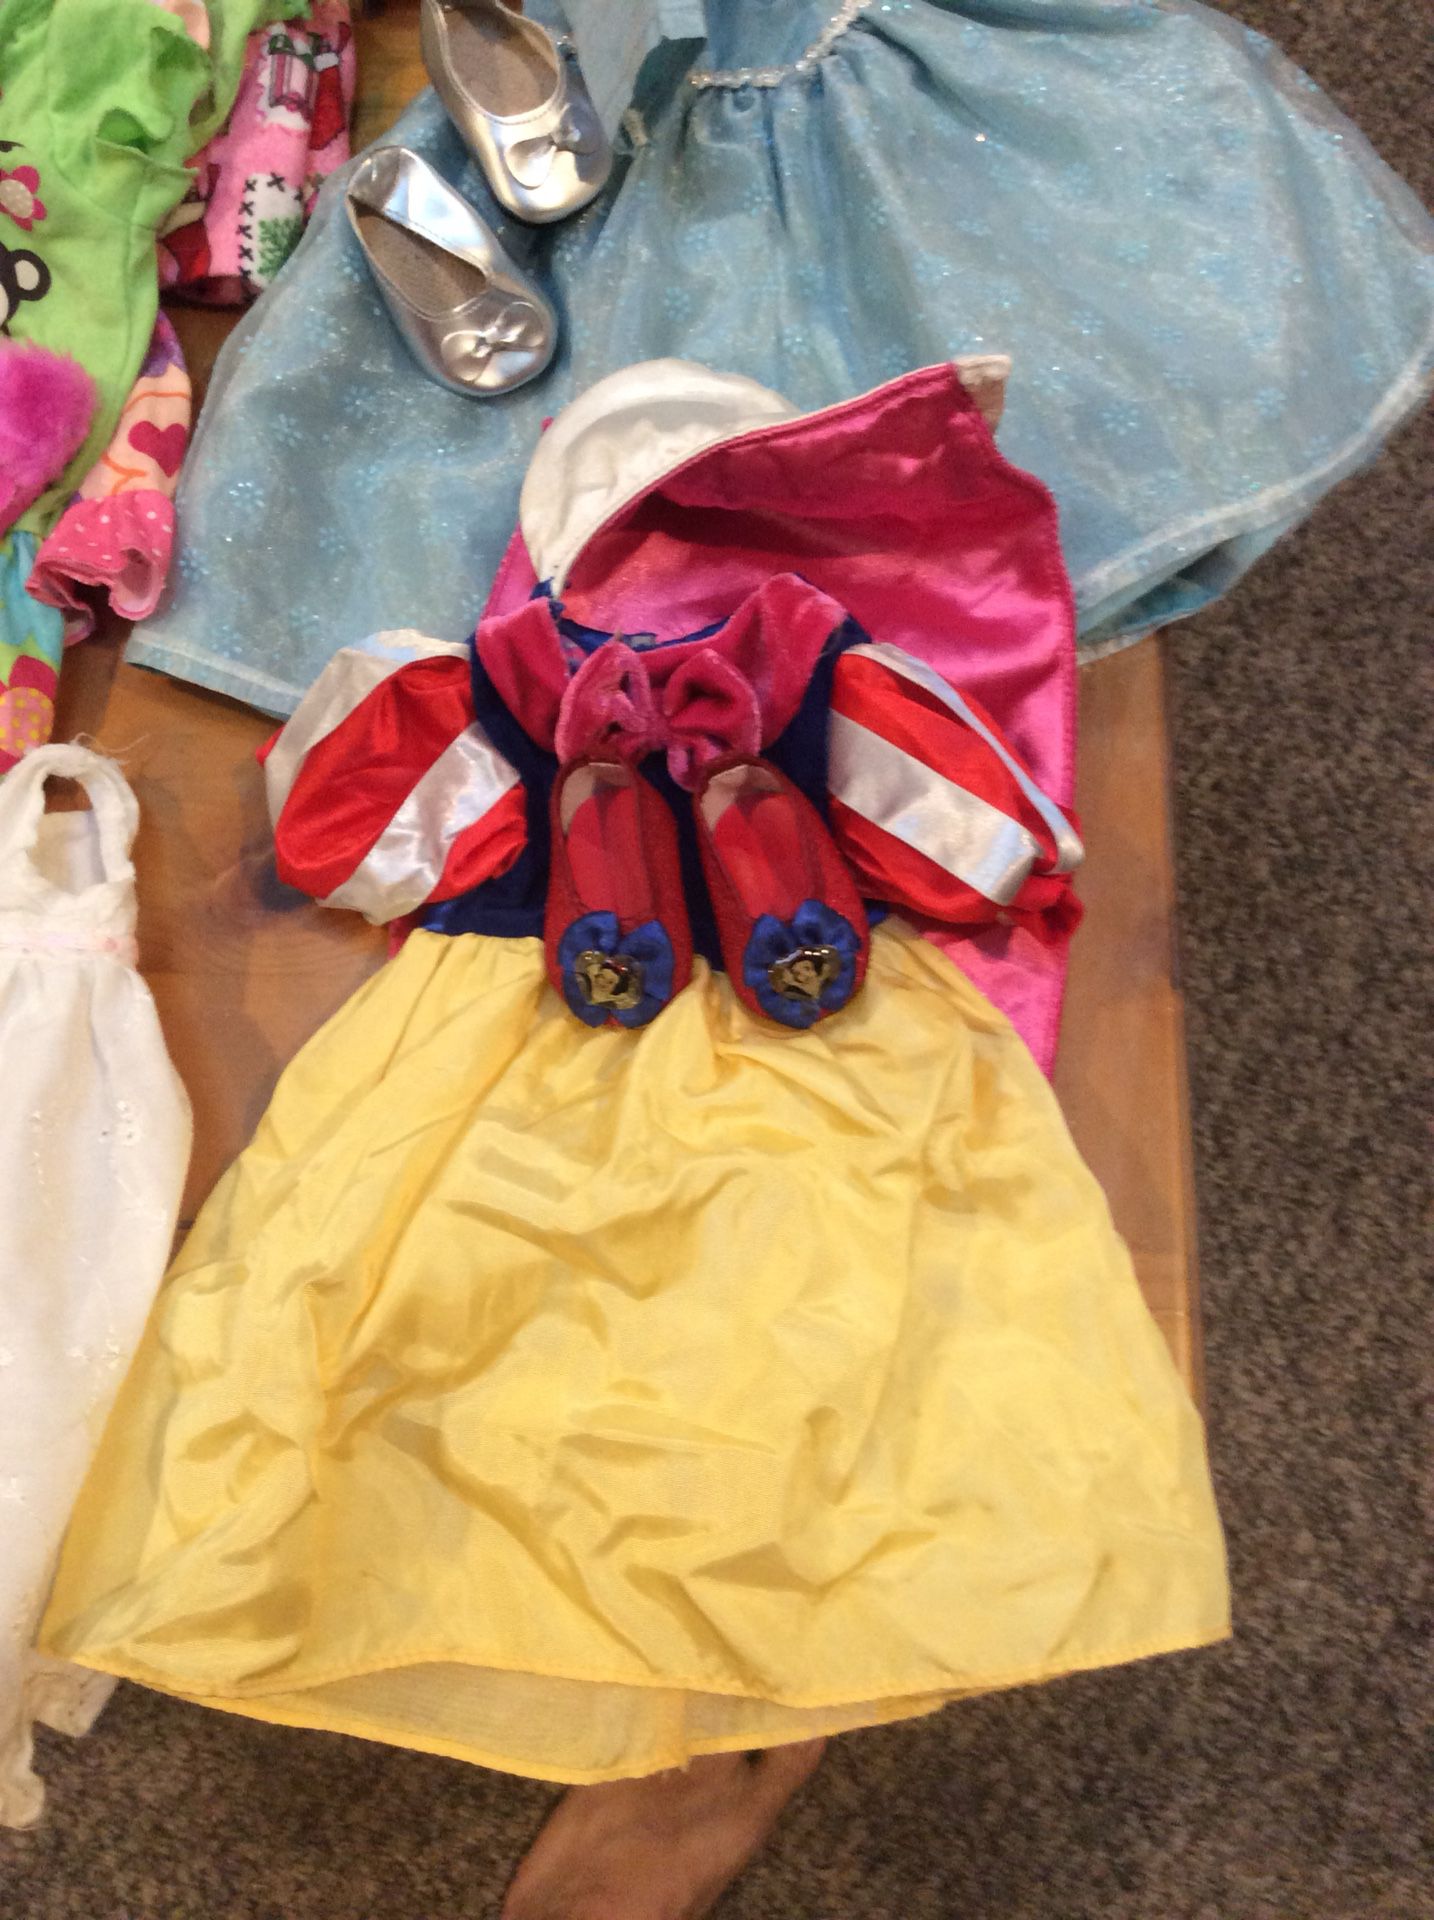 American girl type doll clothes.